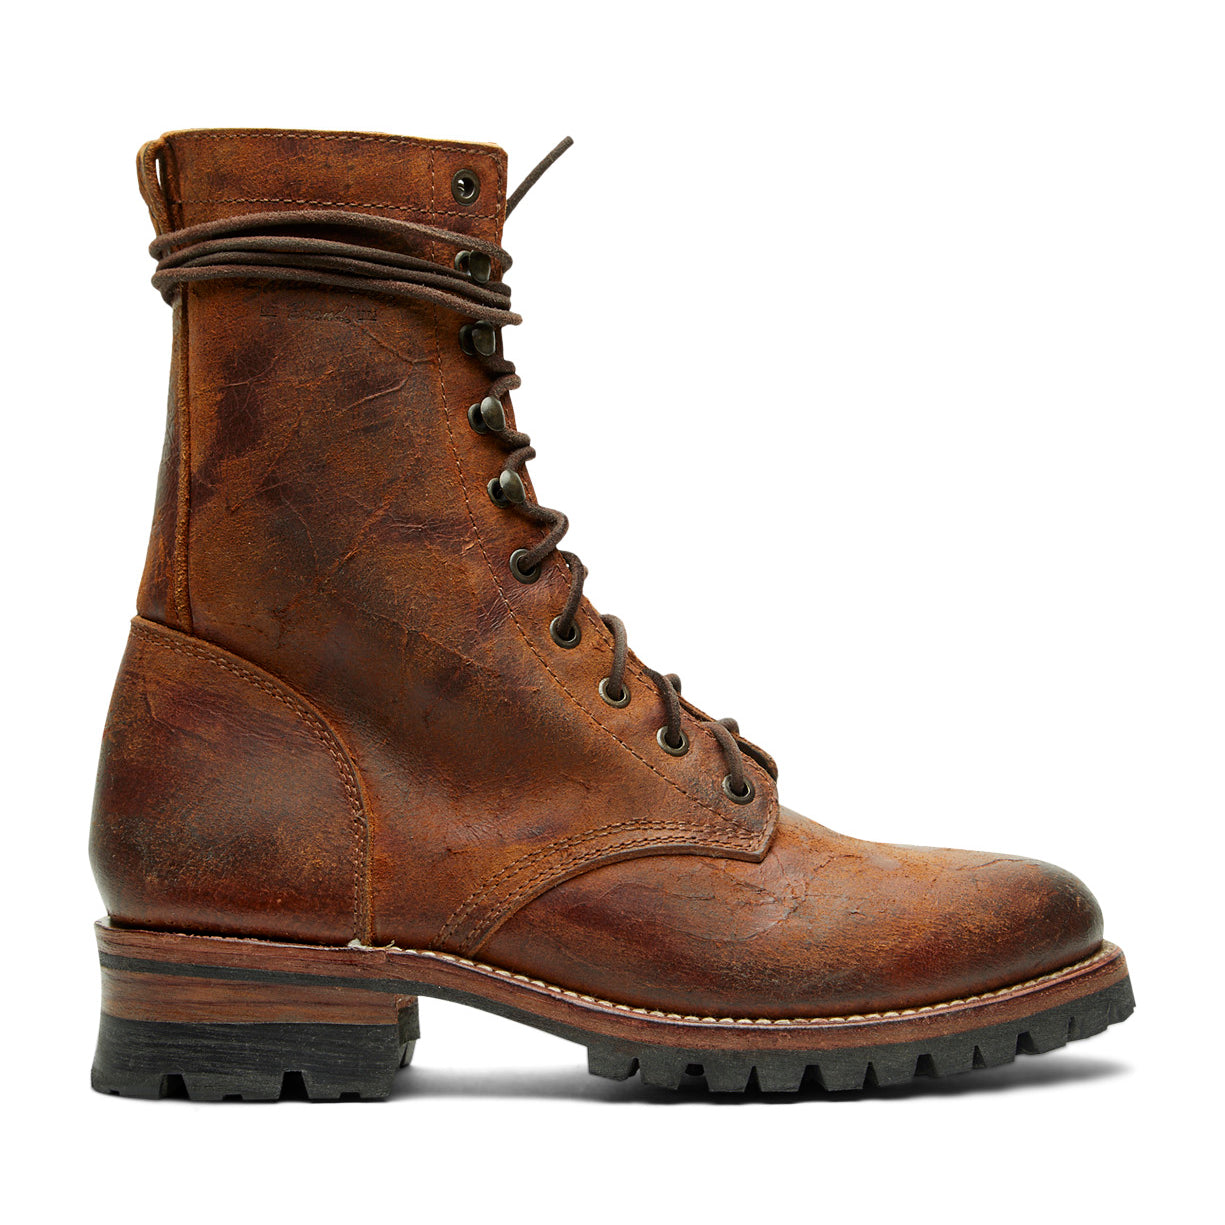 The Santa Rosa Brand Jackson Boot is shown on a white background.